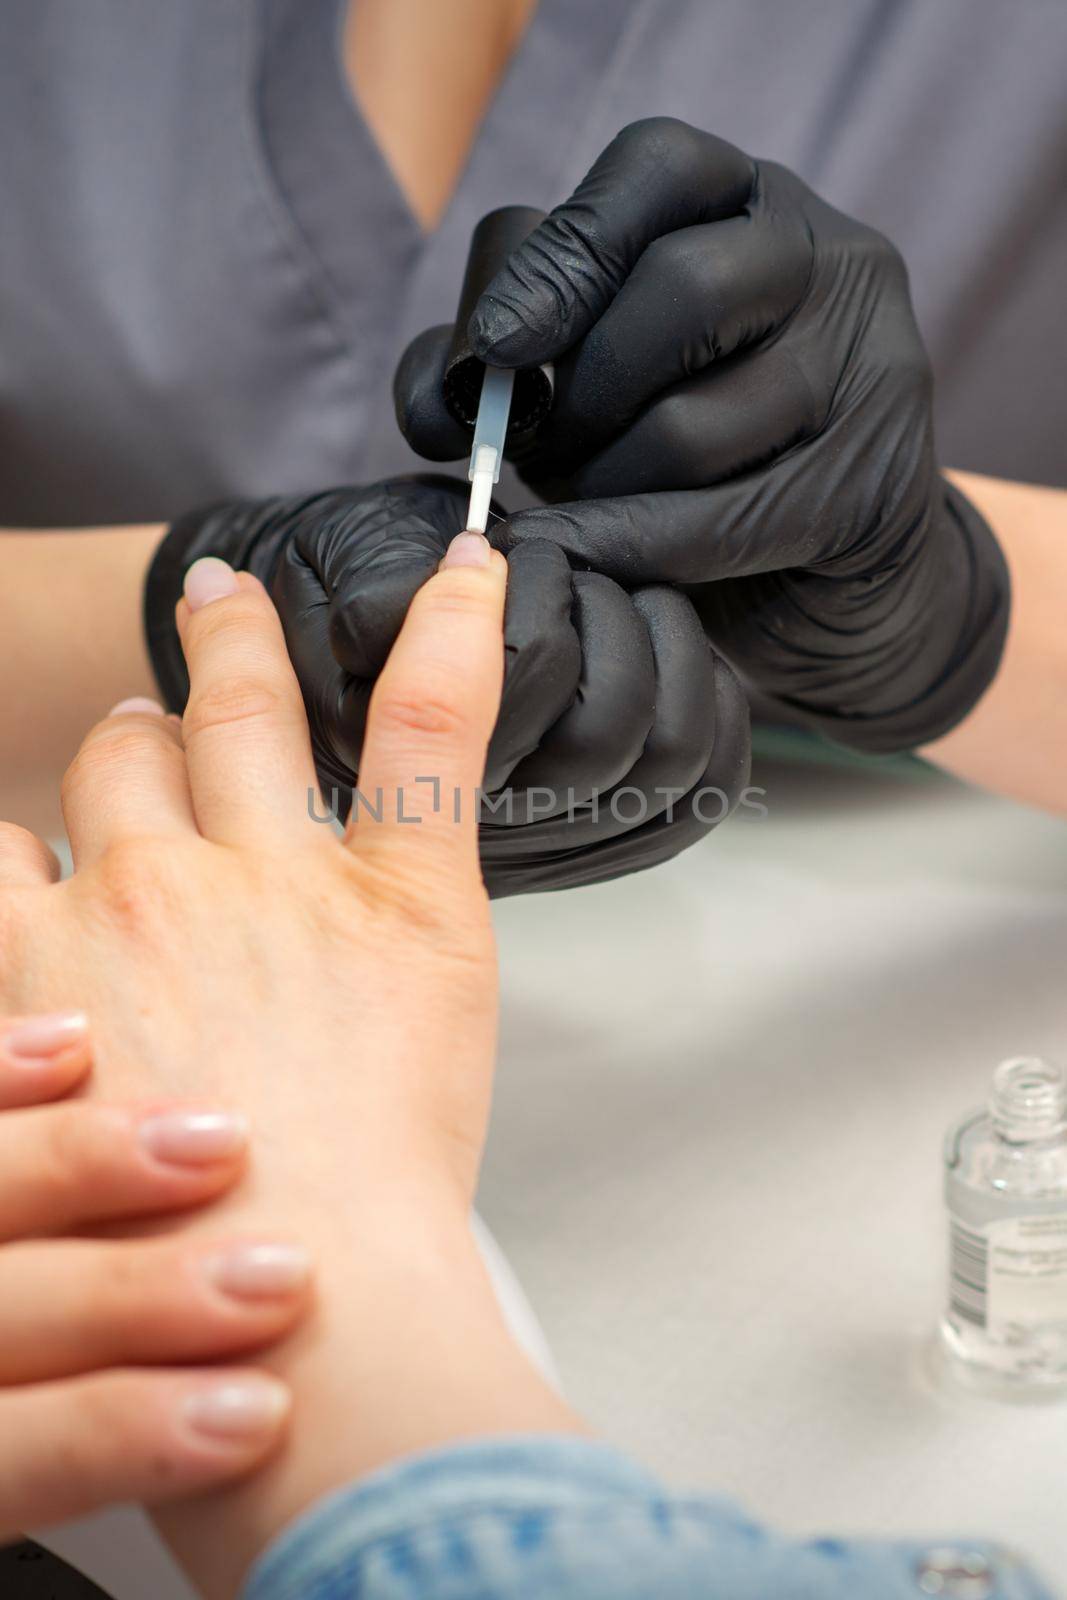 Painting female nails. Hands of manicurist in black gloves is applying transparent nail polish on female nails in a manicure salon. by okskukuruza